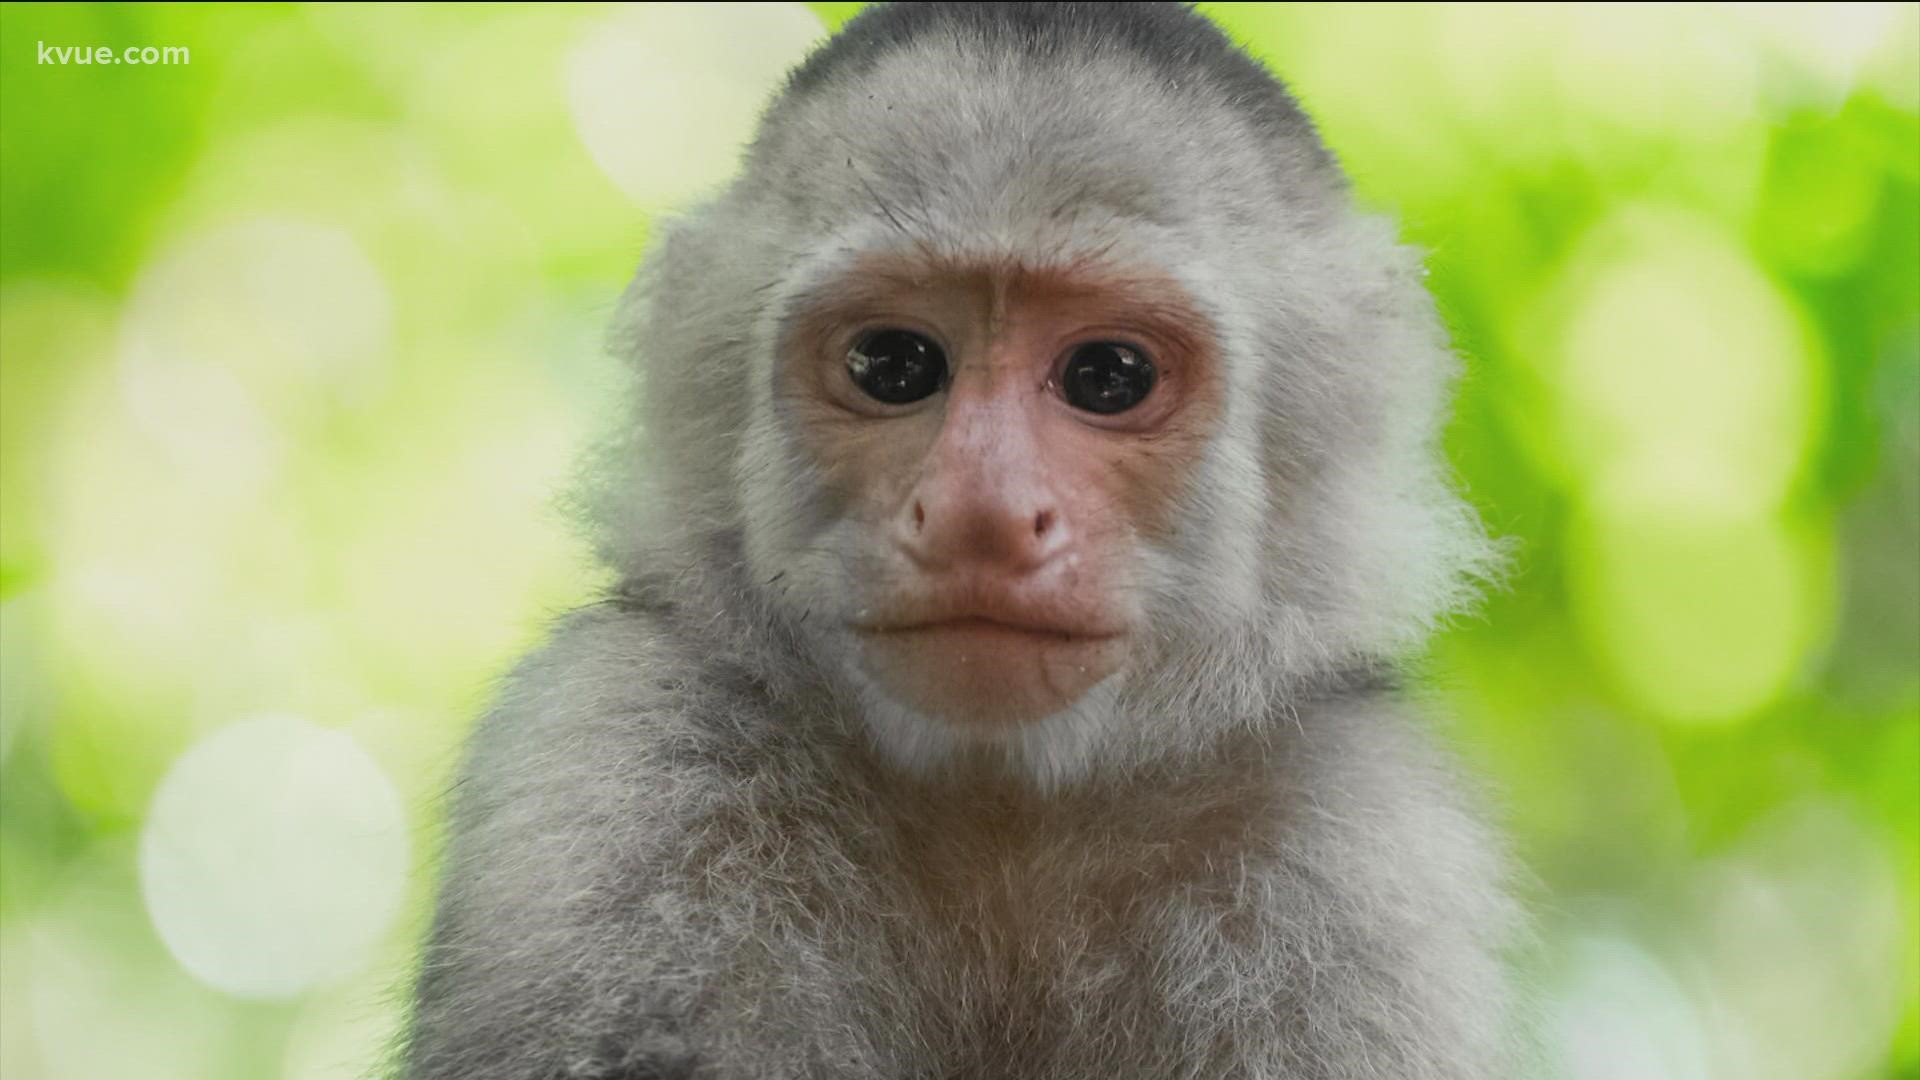 Neuralink accused of performing illegal experiments on monkeys | kvue.com